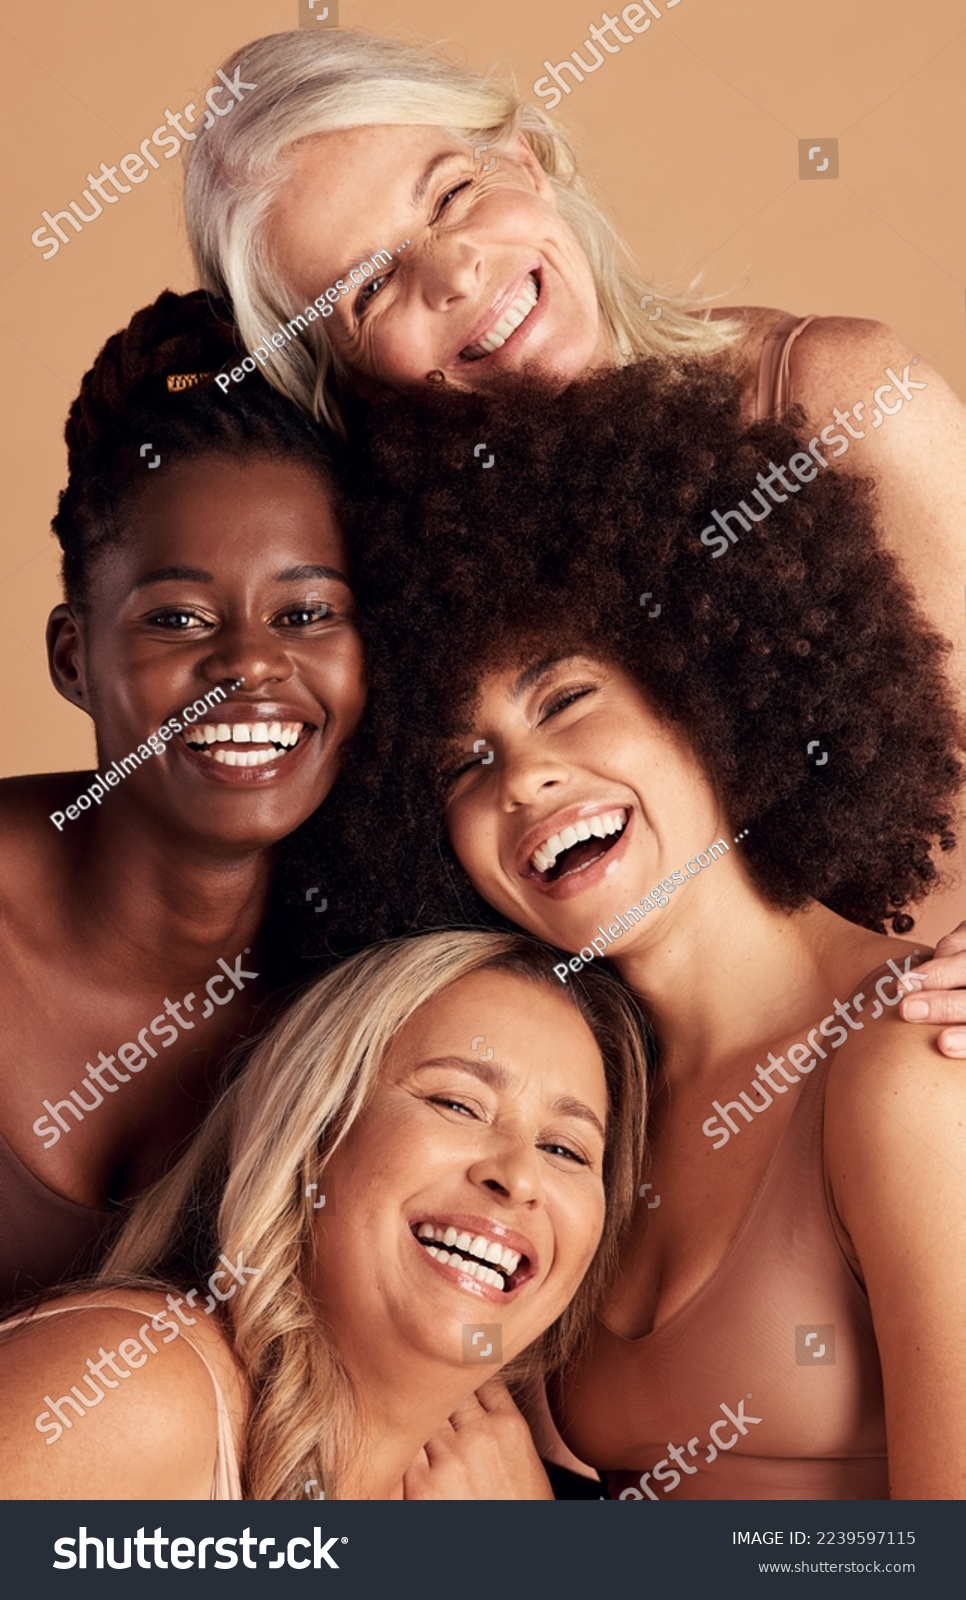 Diversity, beauty and natural with woman friends in studio on a beige background to promote skincare. Portrait, face and smile with a happy female and friend group indoors for luxury cosmetics #2239597115